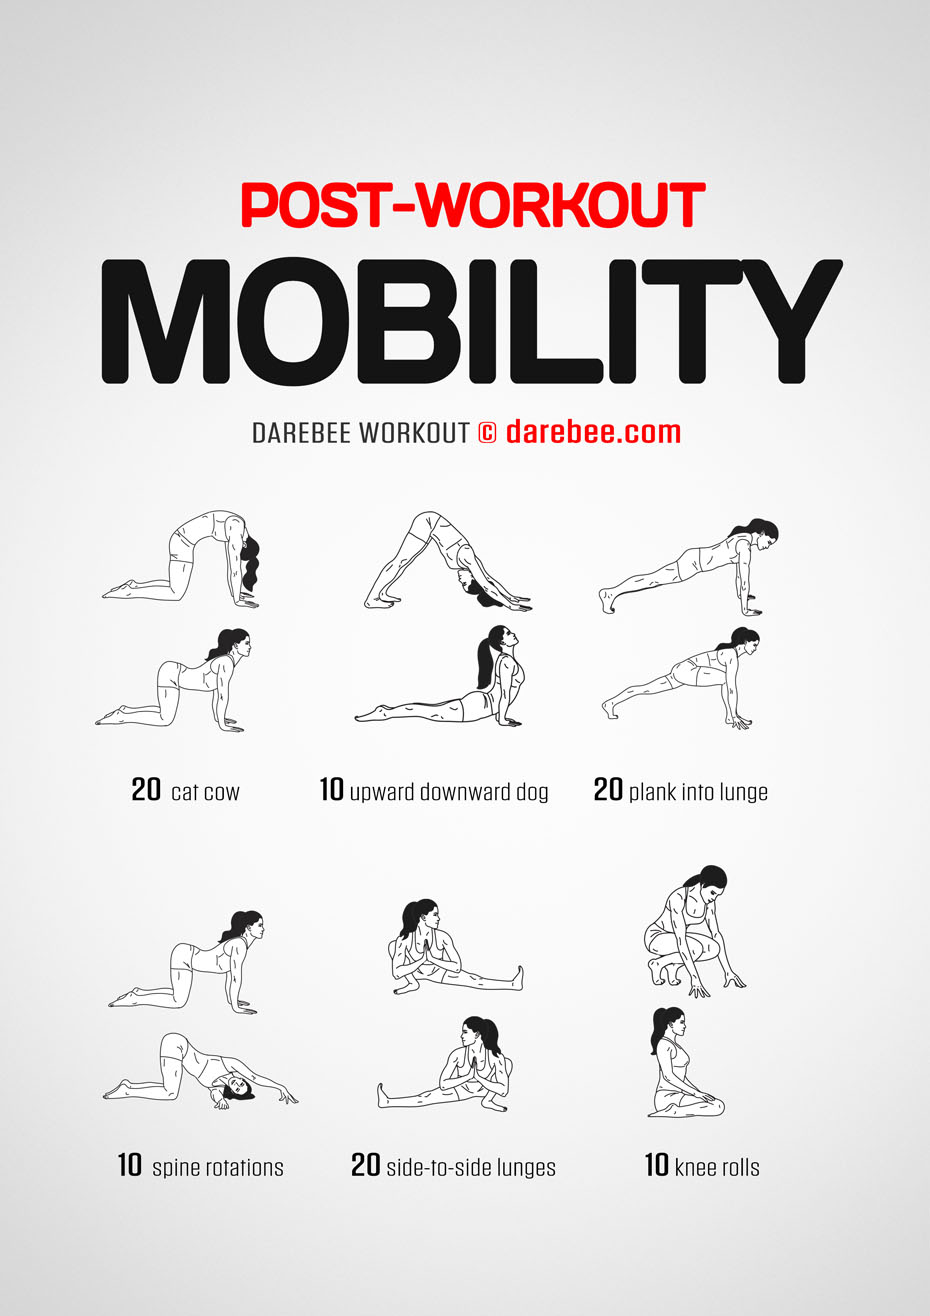 Post-Workout Mobility is  Darebee home-fitness workout that helps you develop greater range of motion.